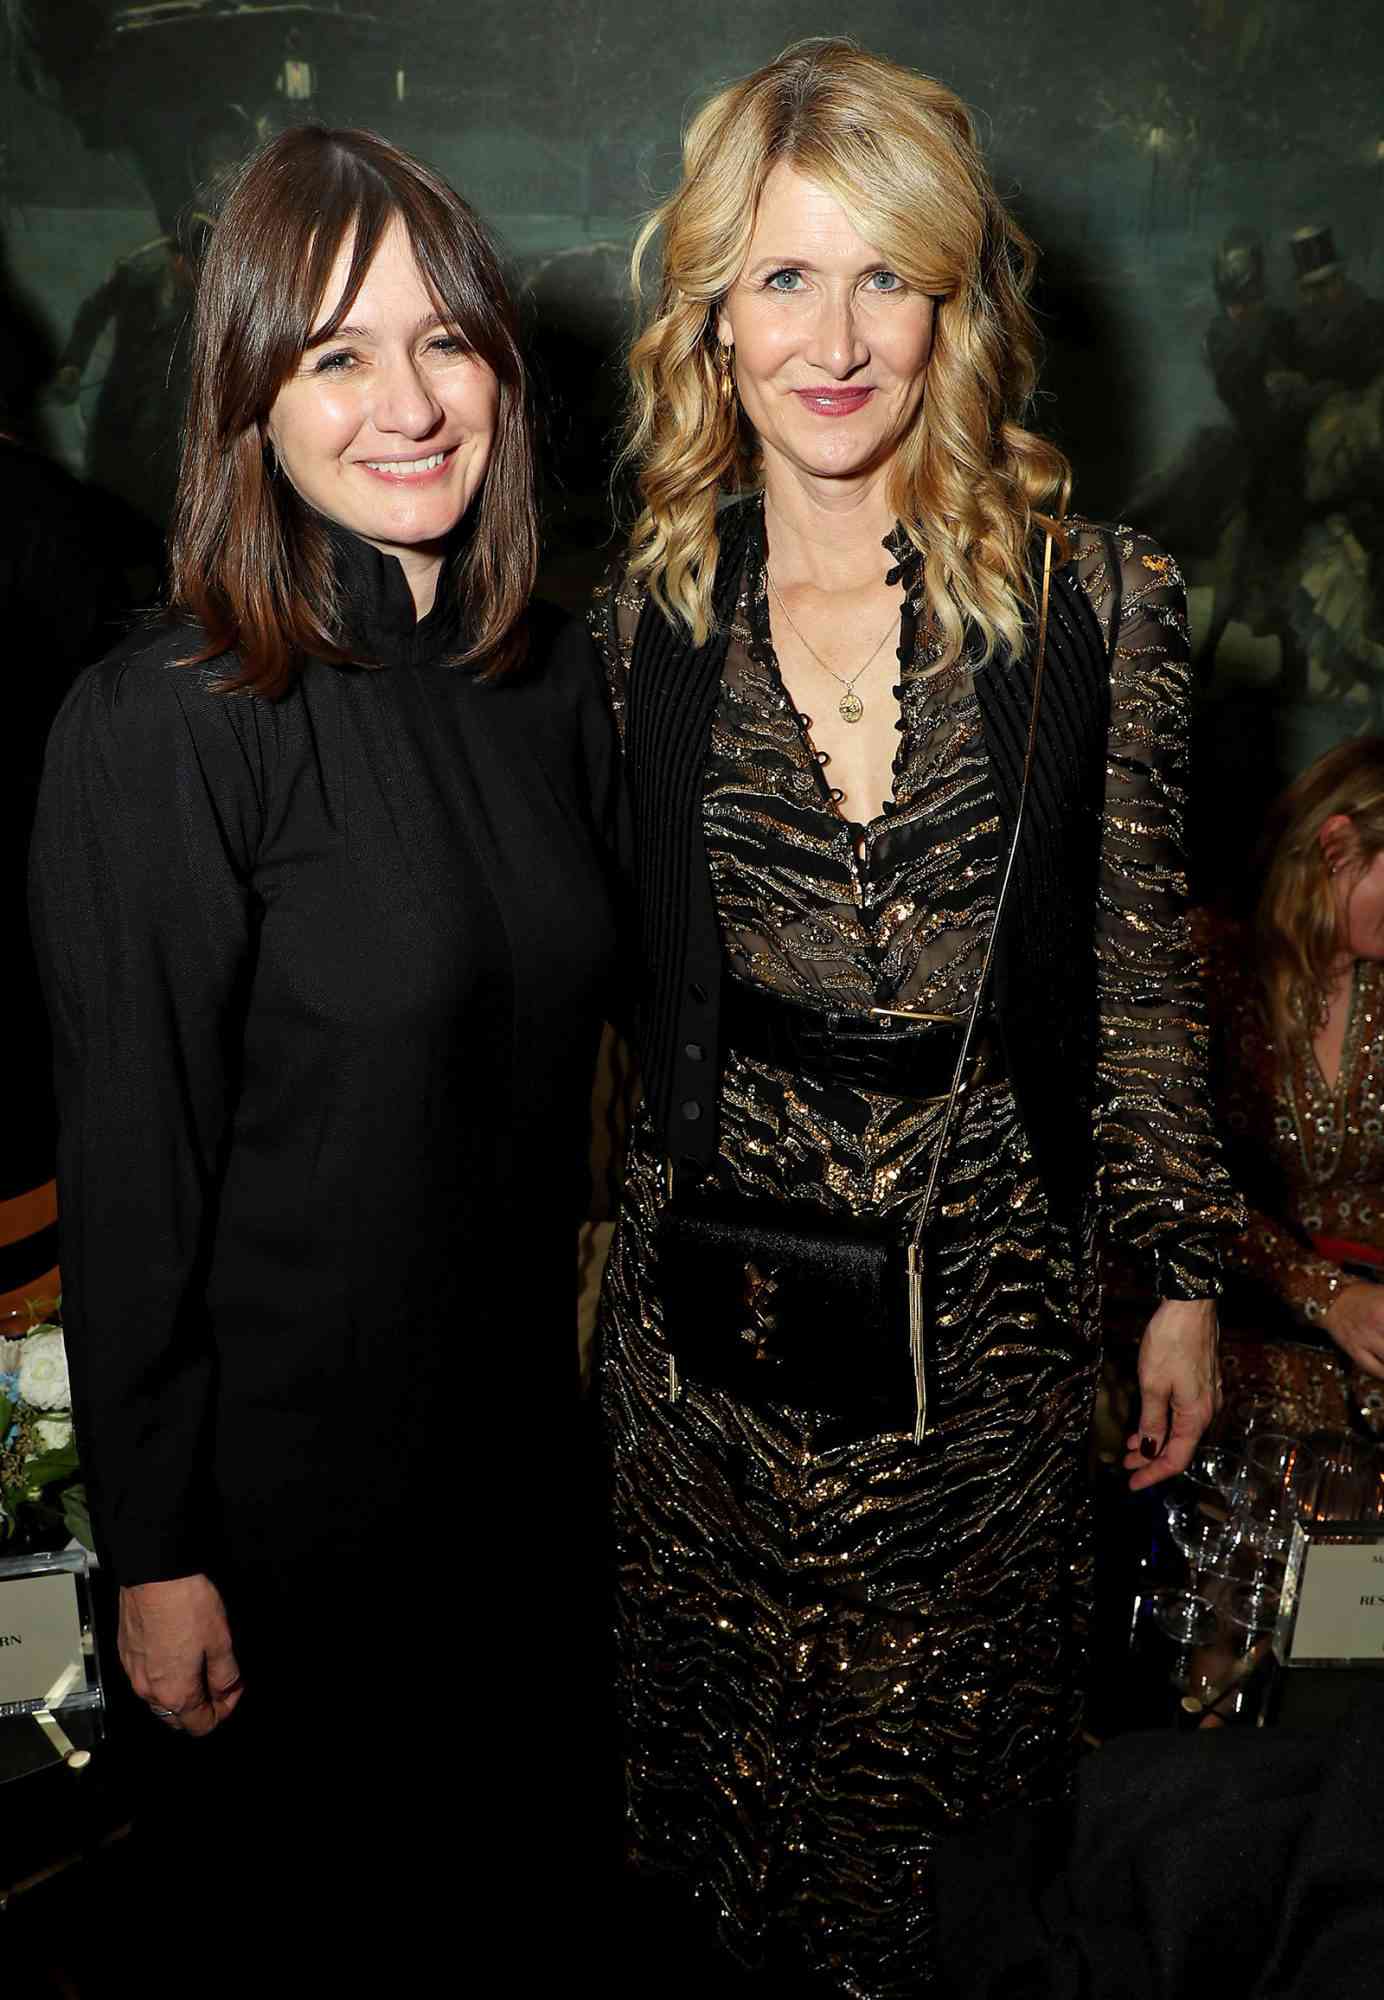 Emily Mortimer, Laura Dern New York Premiere of "Marriage Story" hosted by Netflix at The Paris Theater - After Party Held at The Oak Room New York Plaza, New York, USA - 10 Nov 2019